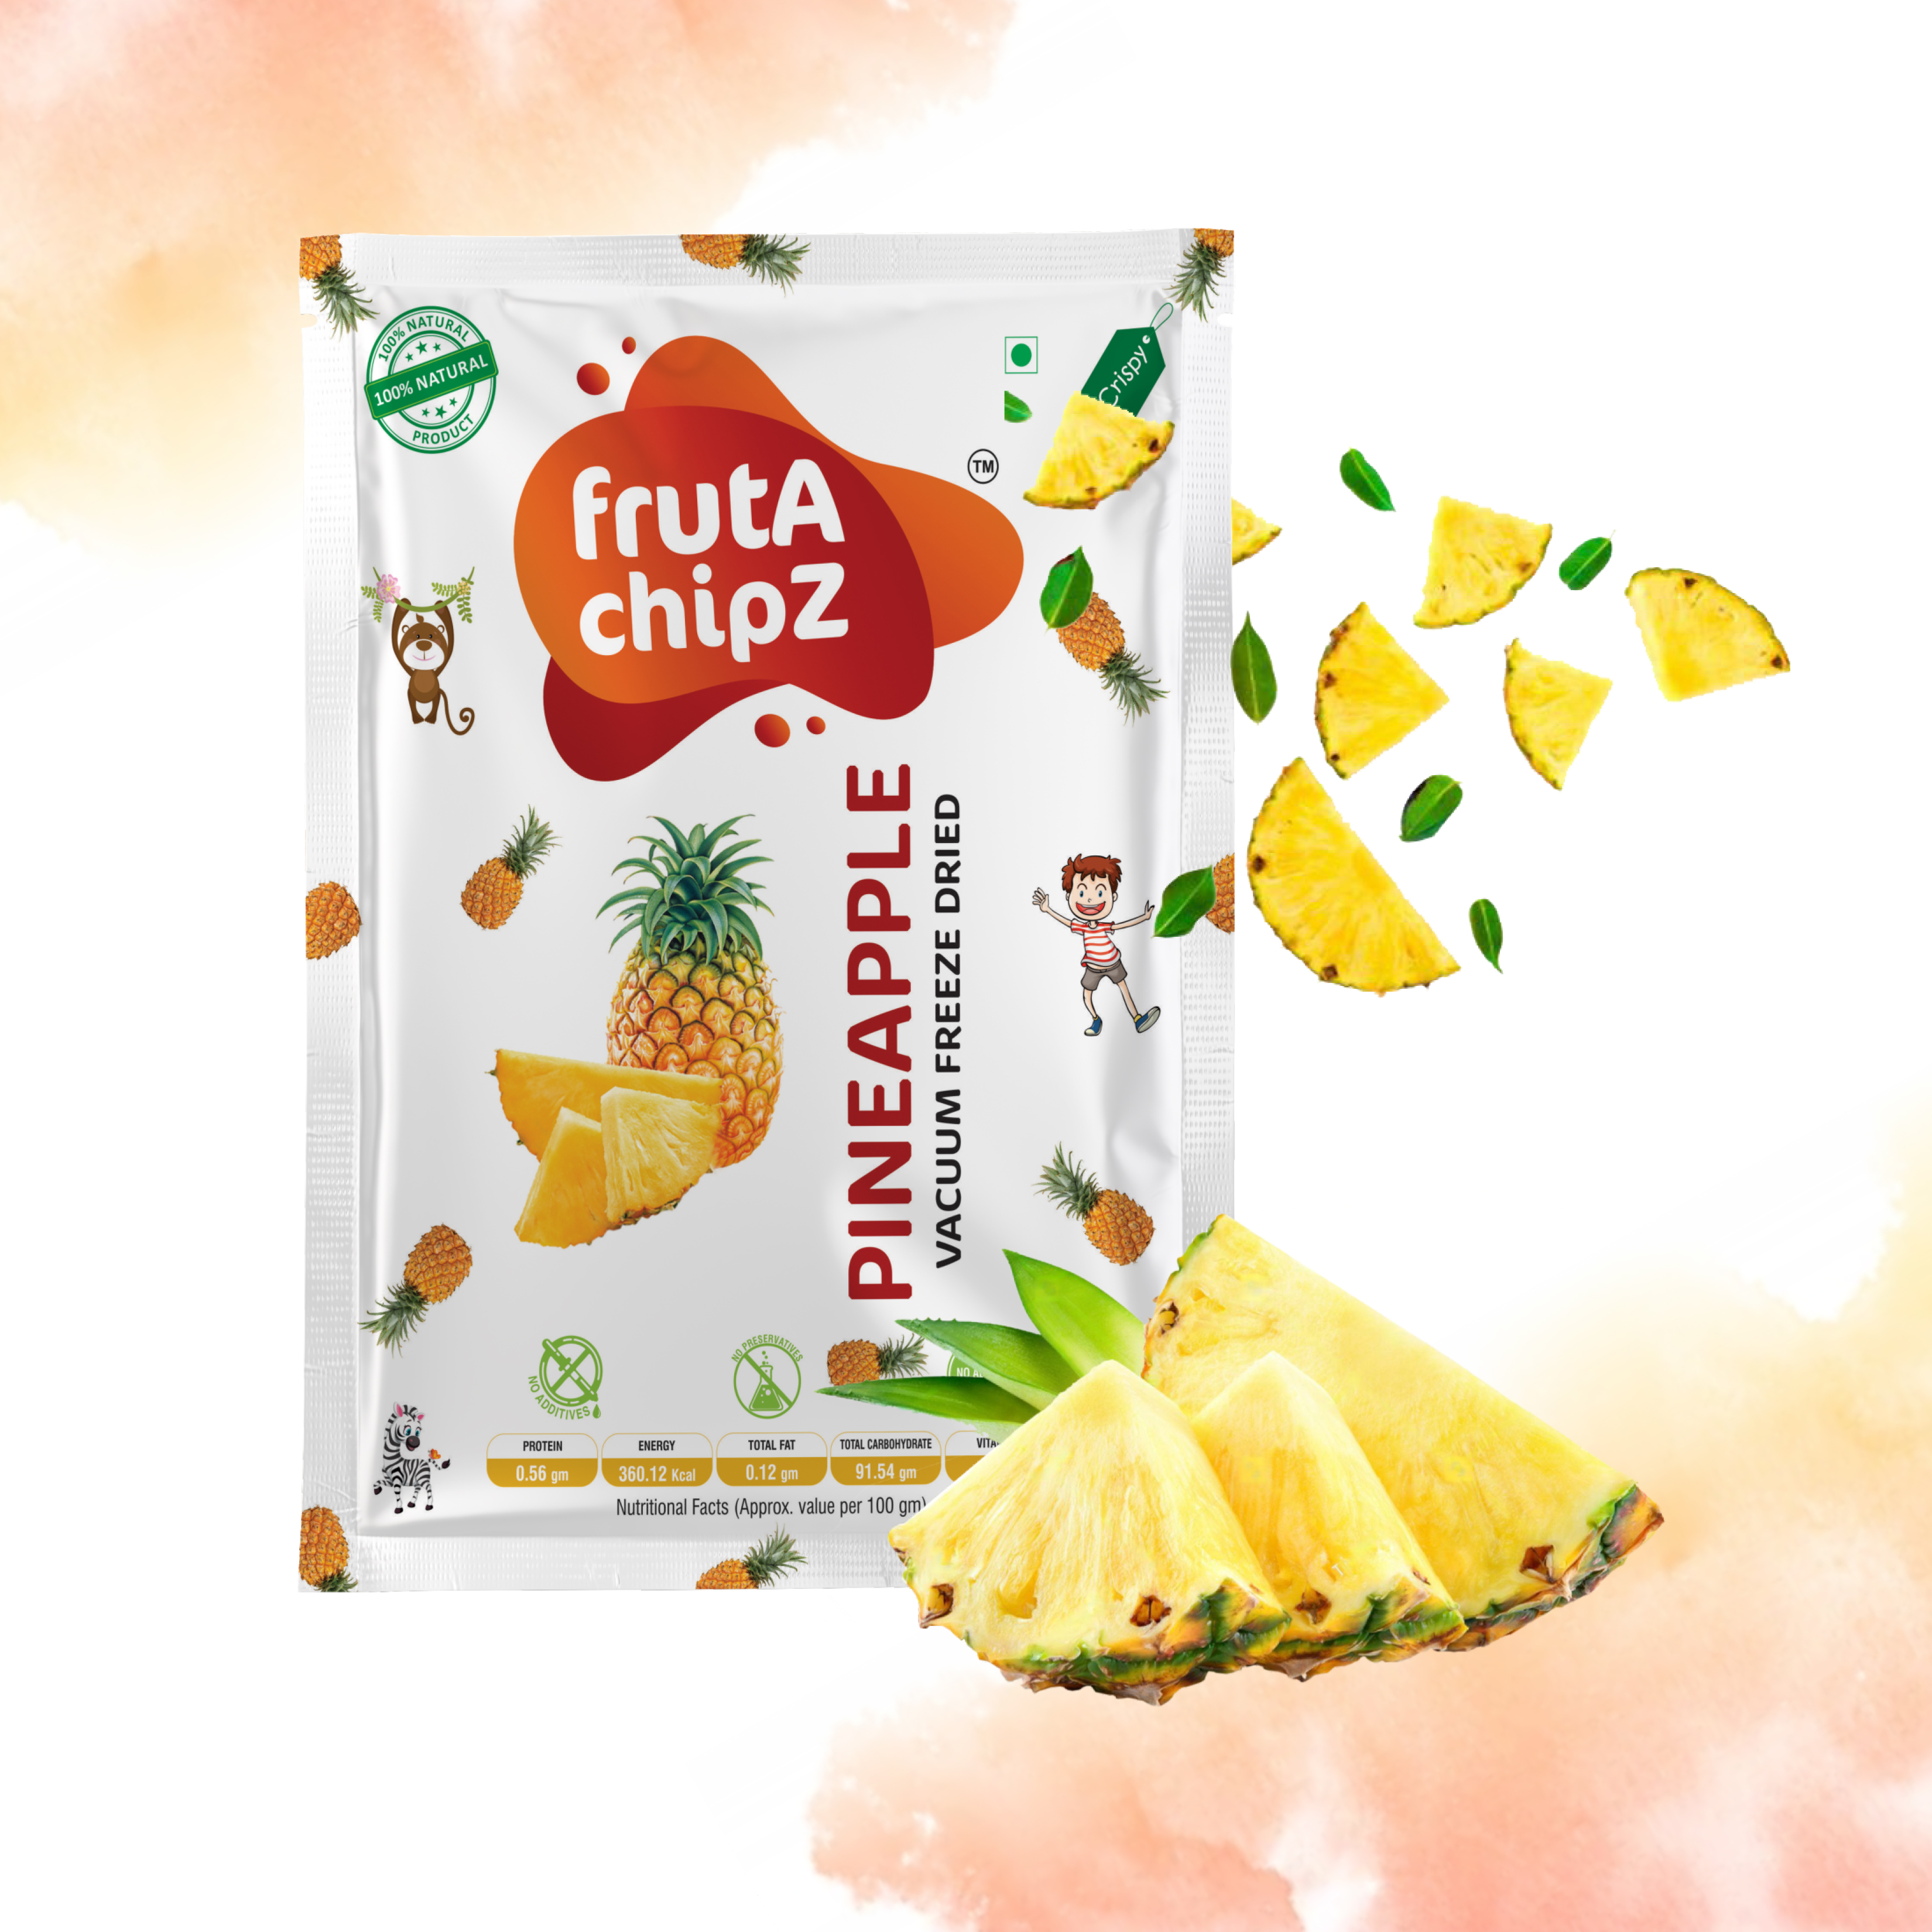 frutA chipZ Dried Pineapple Fruit Chips for Kids and Adults |100% Natural | Healthy Pineapple Fruit Chips |Fruit Slices |Pack of 5|100 Gms|Ready to Eat|